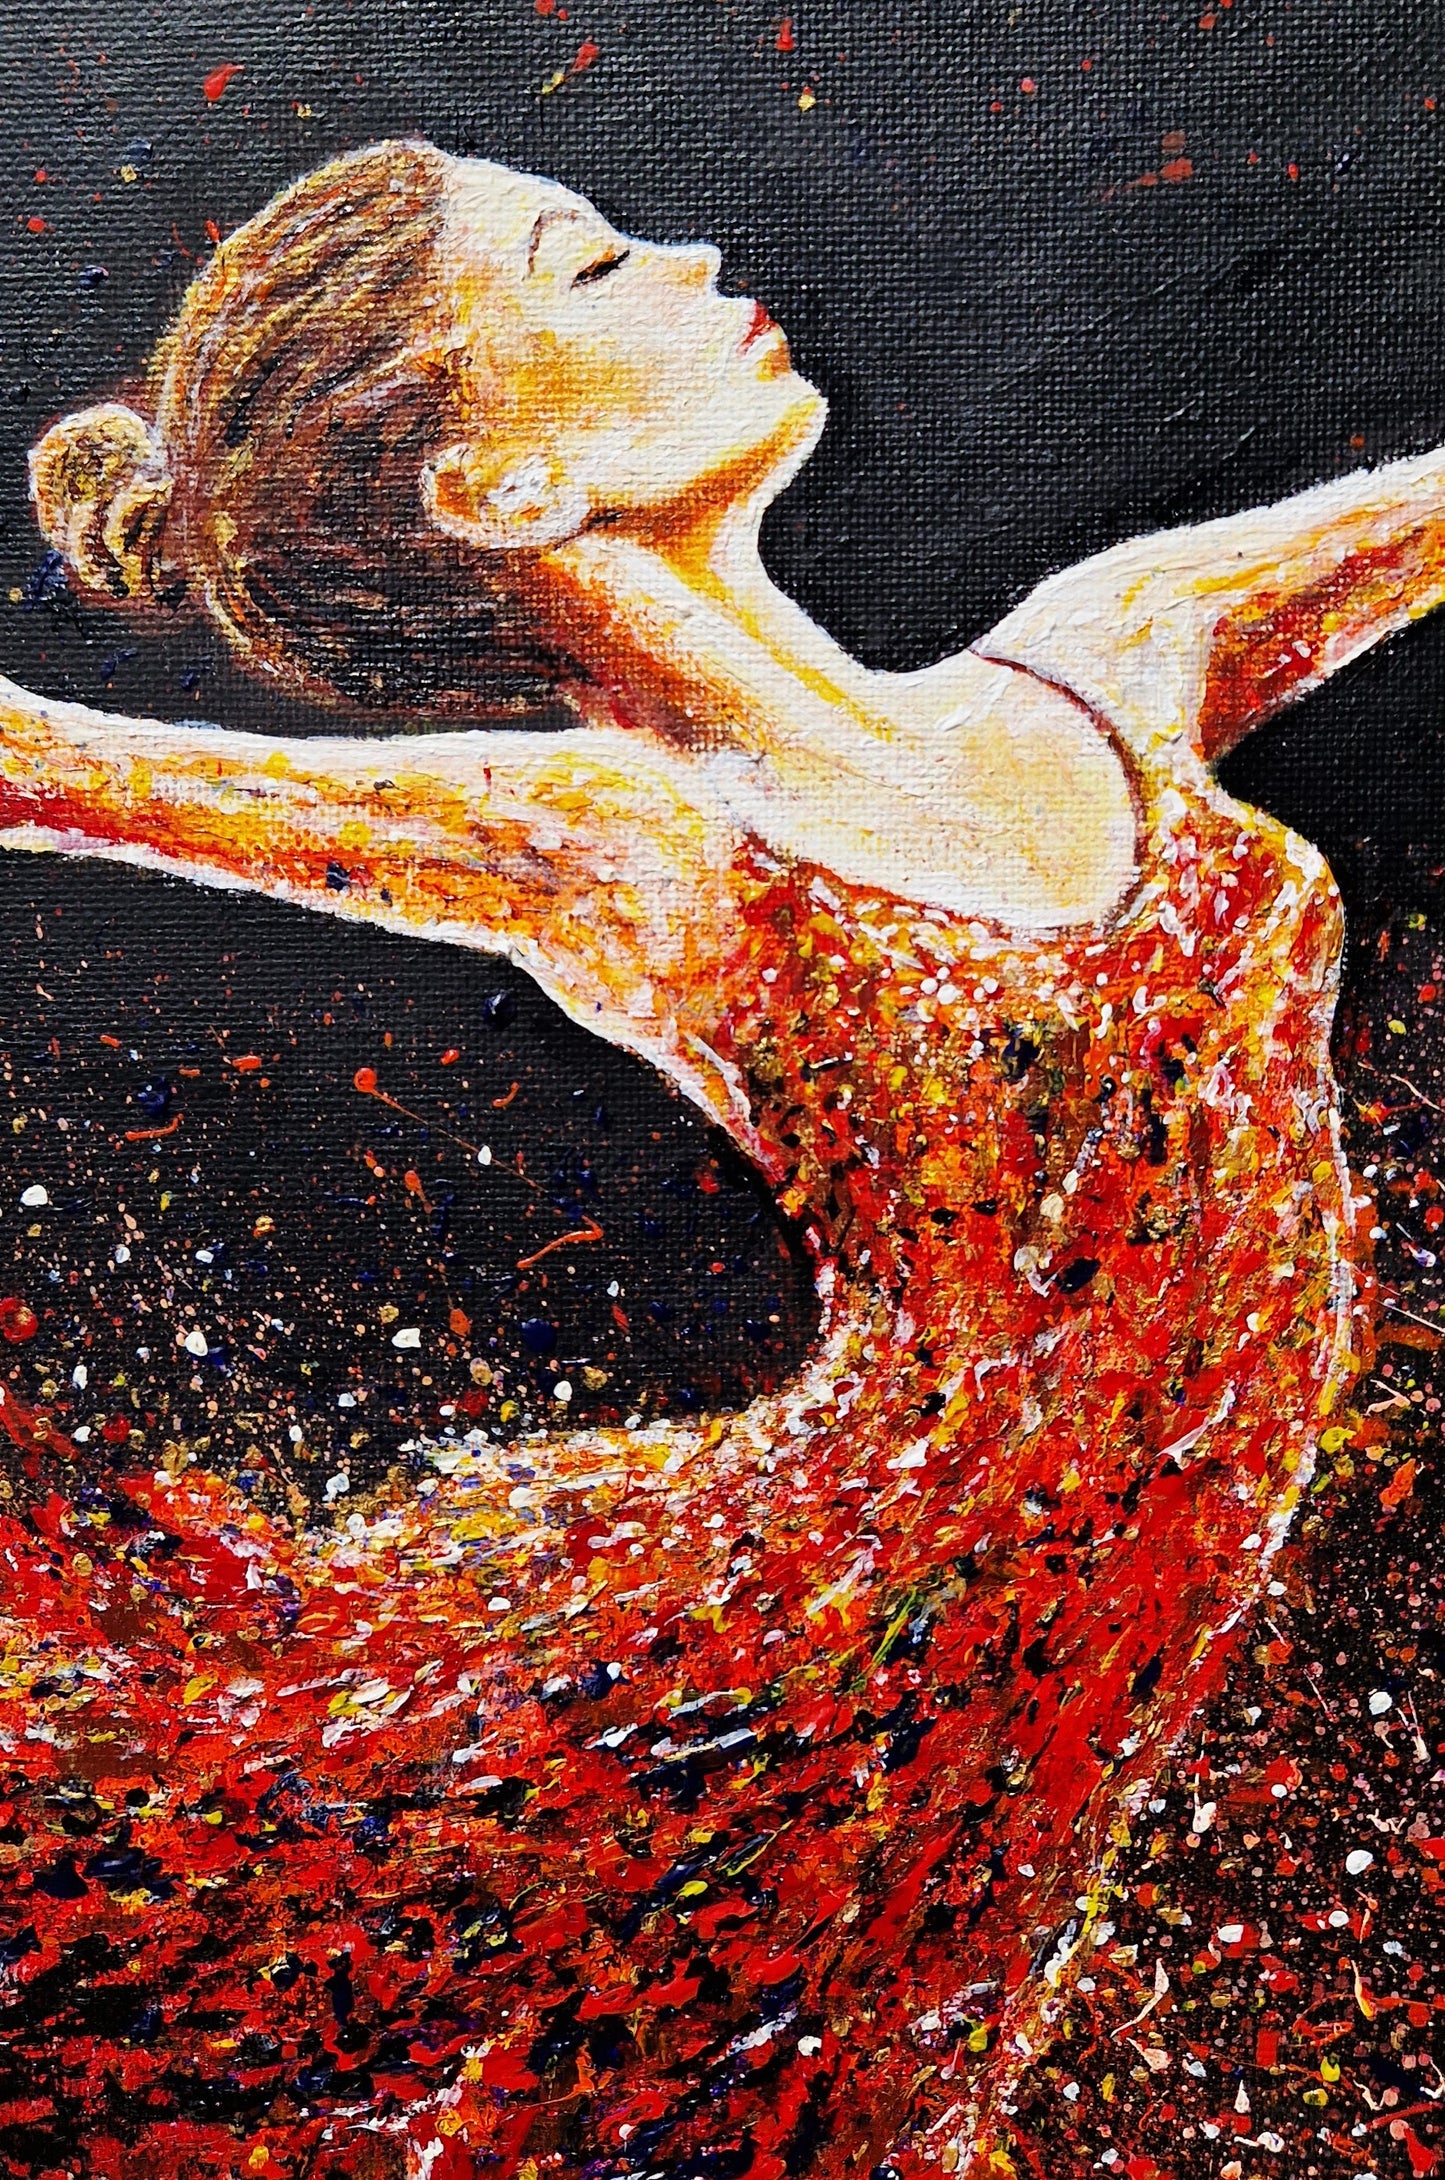 Original Painting "A Dancer's Fading Dreams", 2023, 50x70cm, 20x28 inches